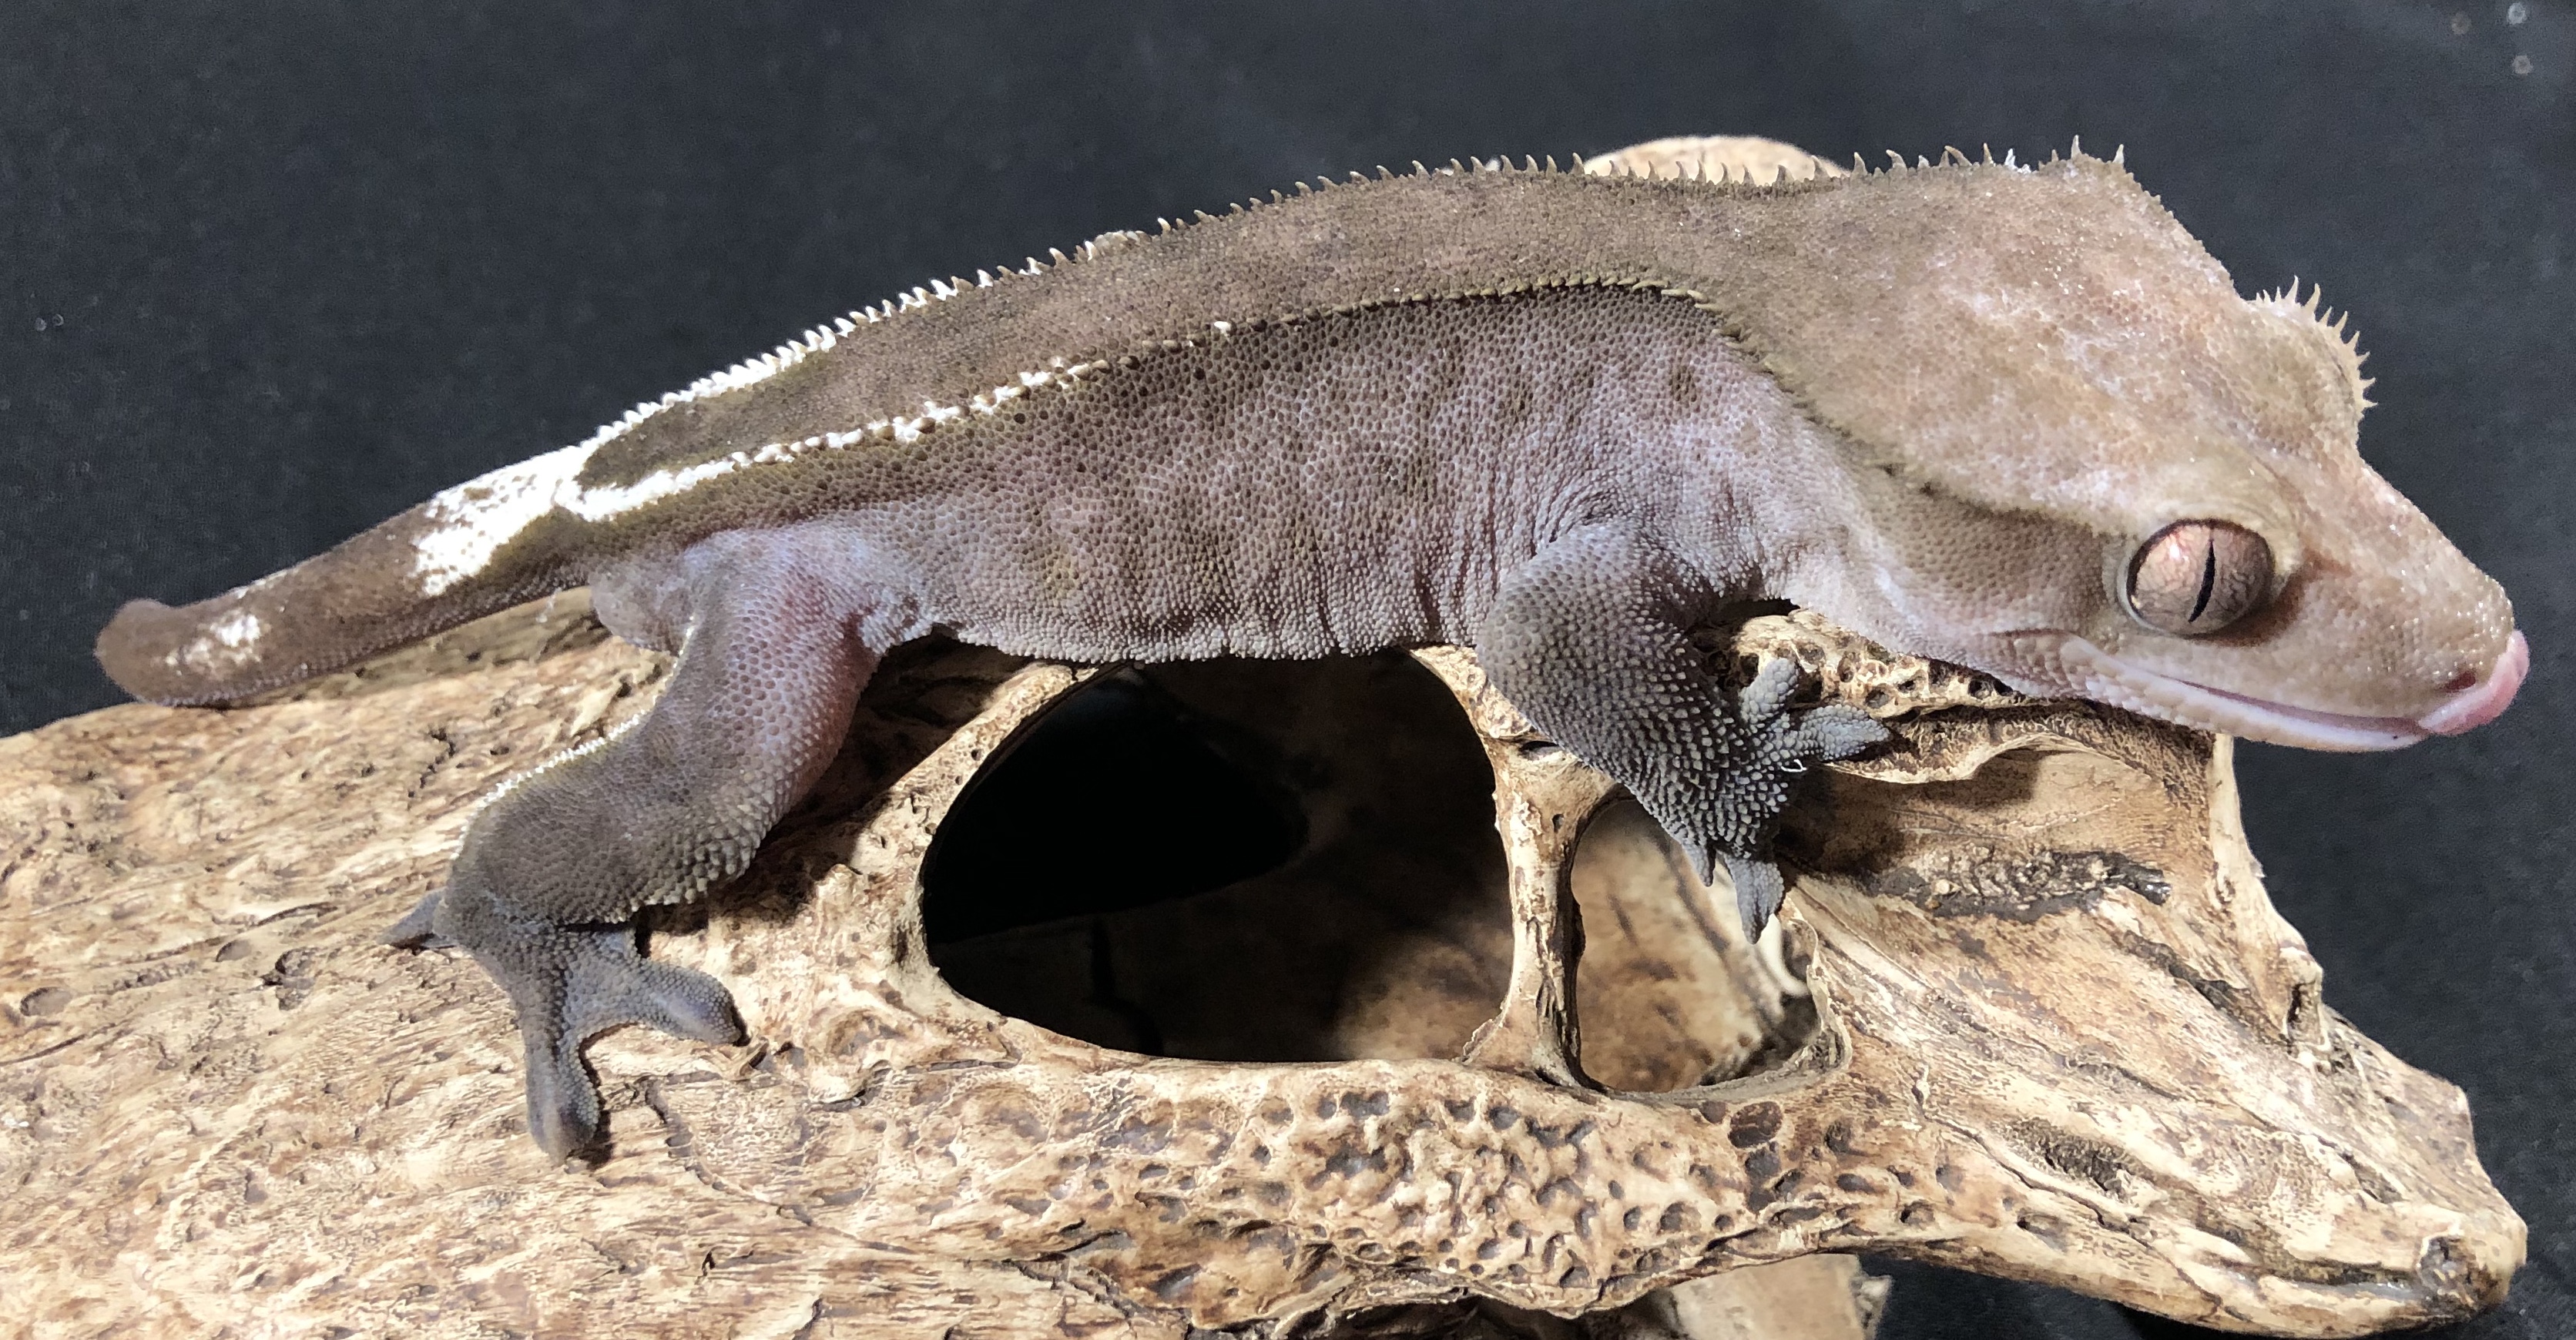 Proven Male Axanthic Crested Gecko by Jersey's Exotic Reptile Keepers